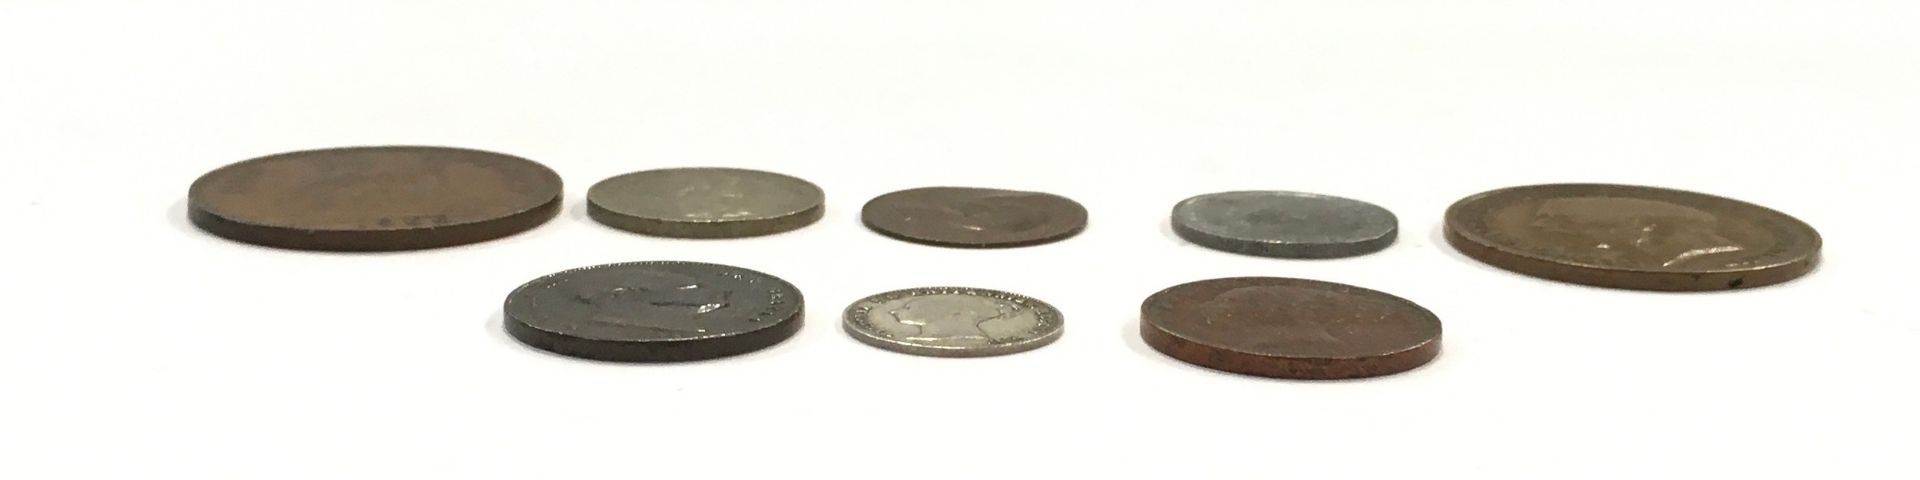 Small collection of 3 English overstamped date coins and 5 other interesting coins. - Image 3 of 3